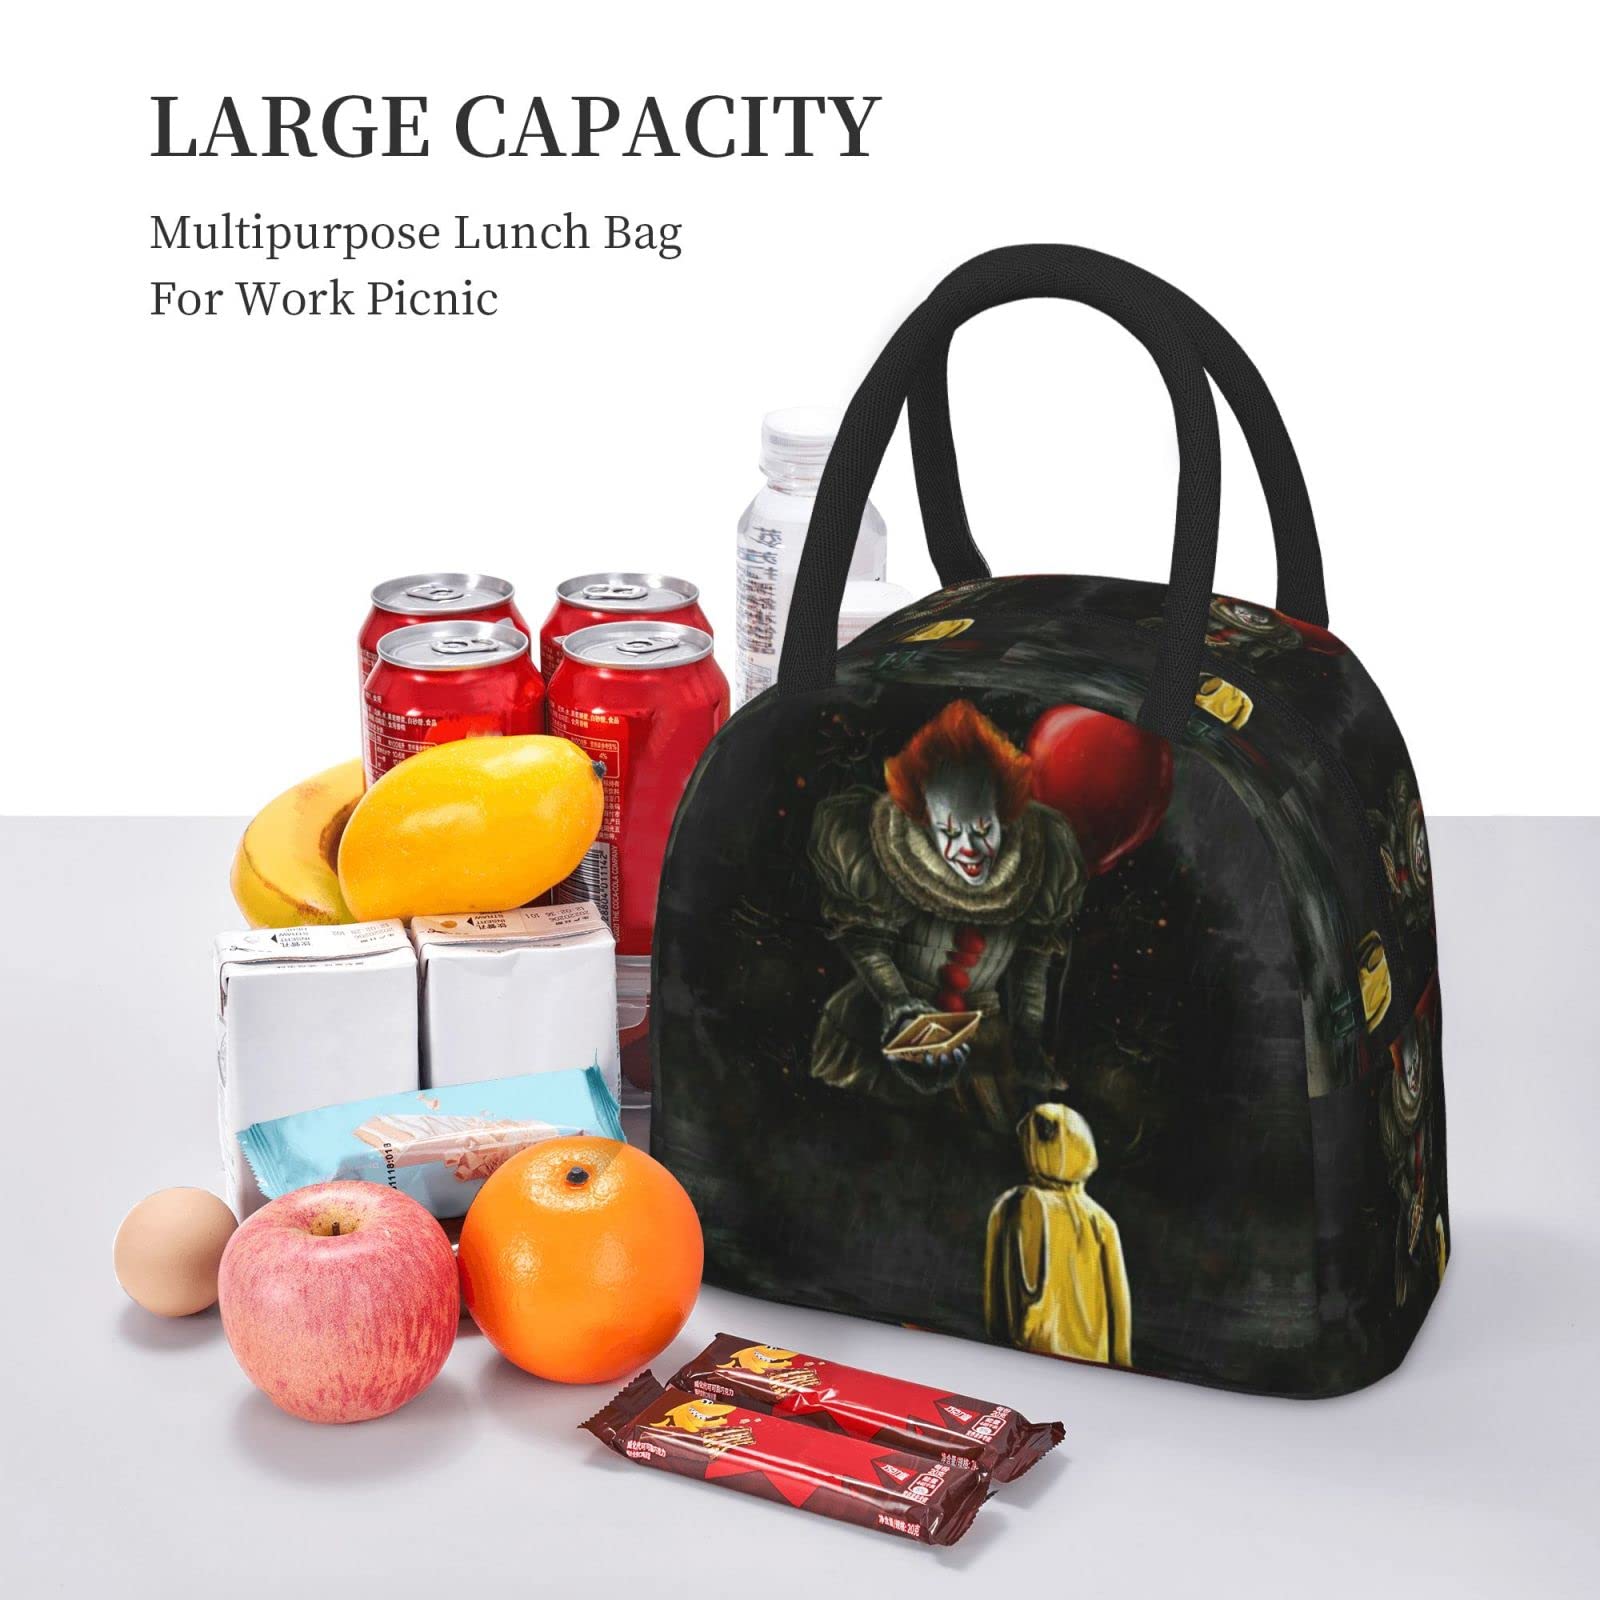 Unisex Travel Lunch Bag for Women Girls Classic Lunch Box Fashion Lunch Cooler Bags for Work/School/Picnic/Office/Hiking/Outdoor/Camping/Fishing